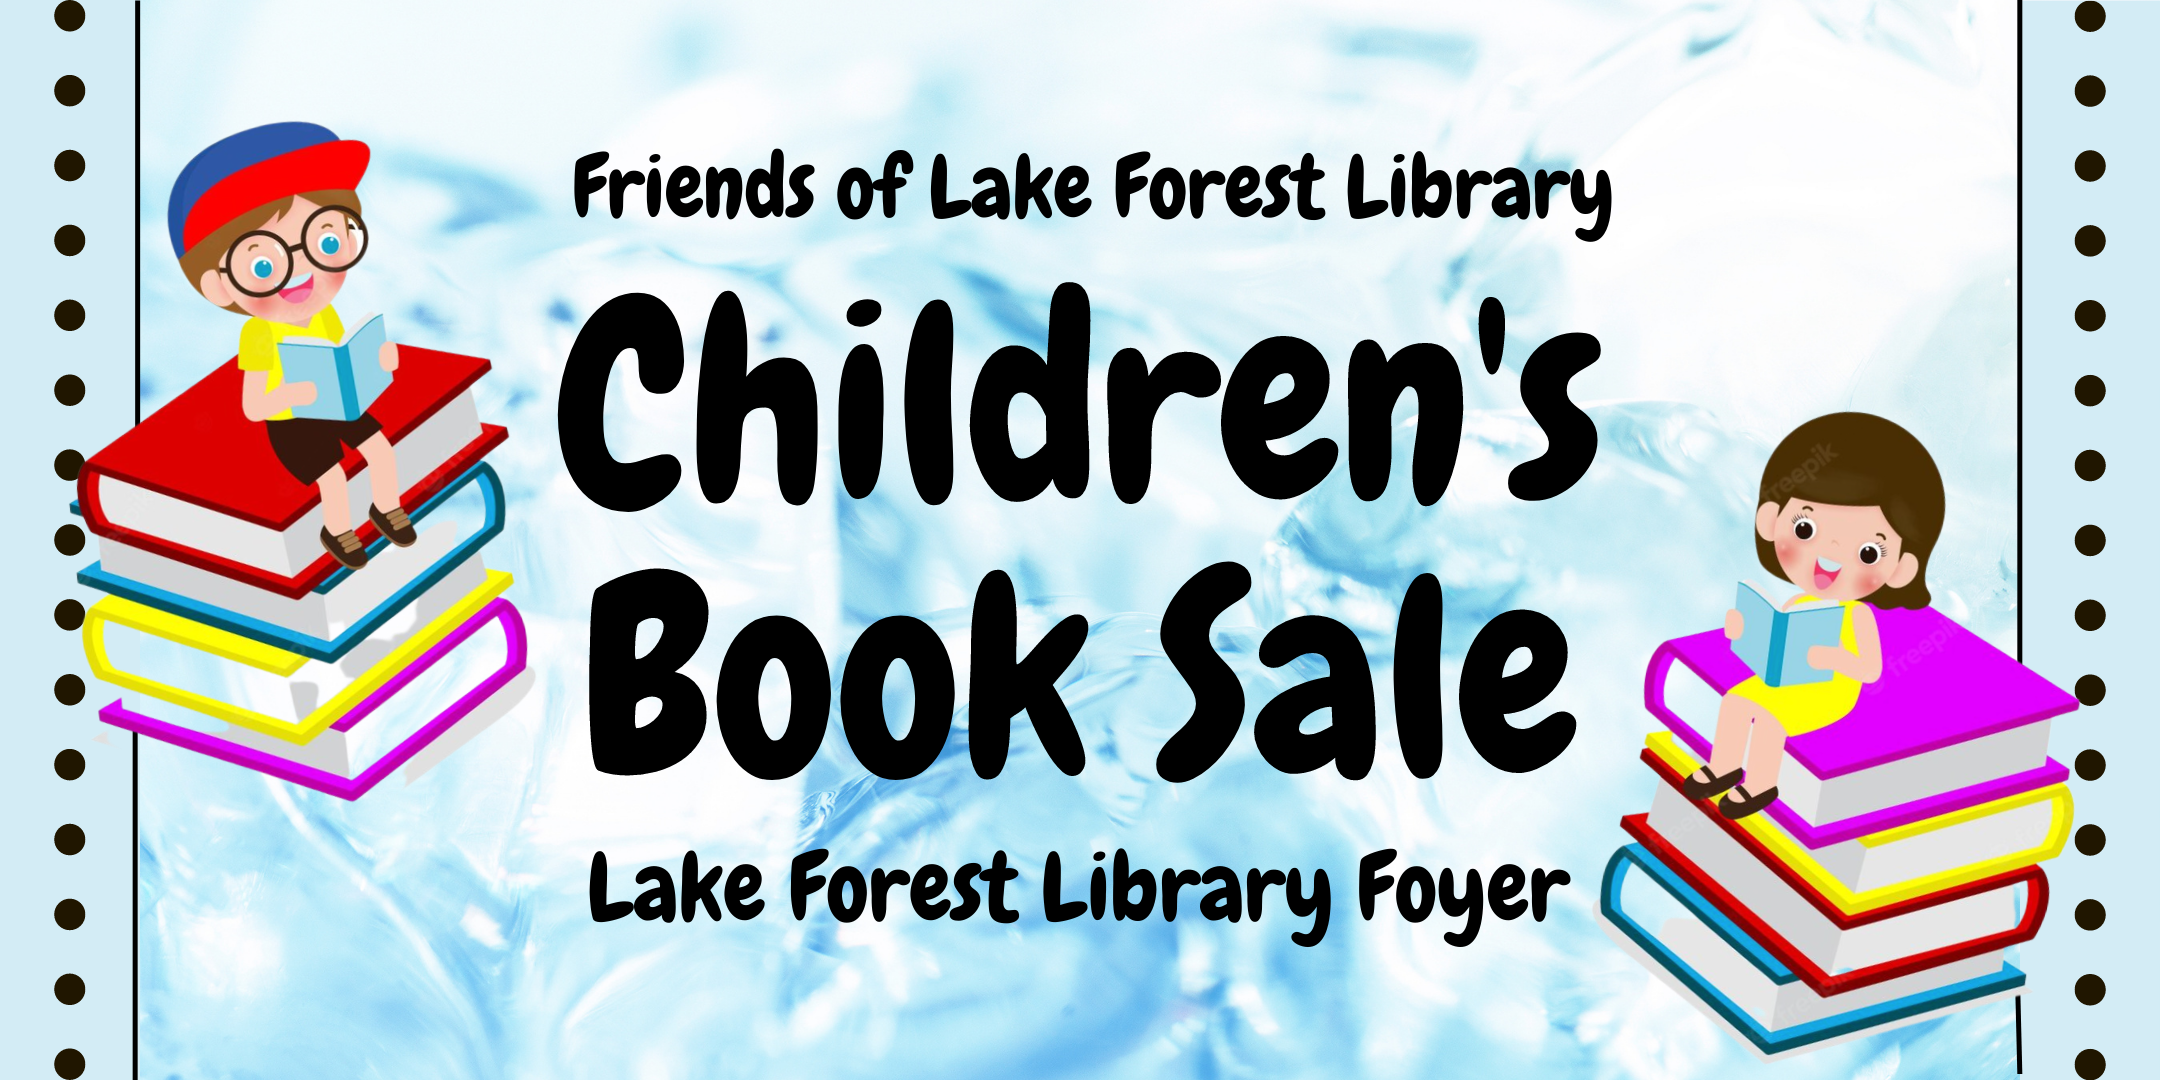 Image of "Friends of the Lake Forest Library Children's Book Sale in the Lake Forest Library Foyer"